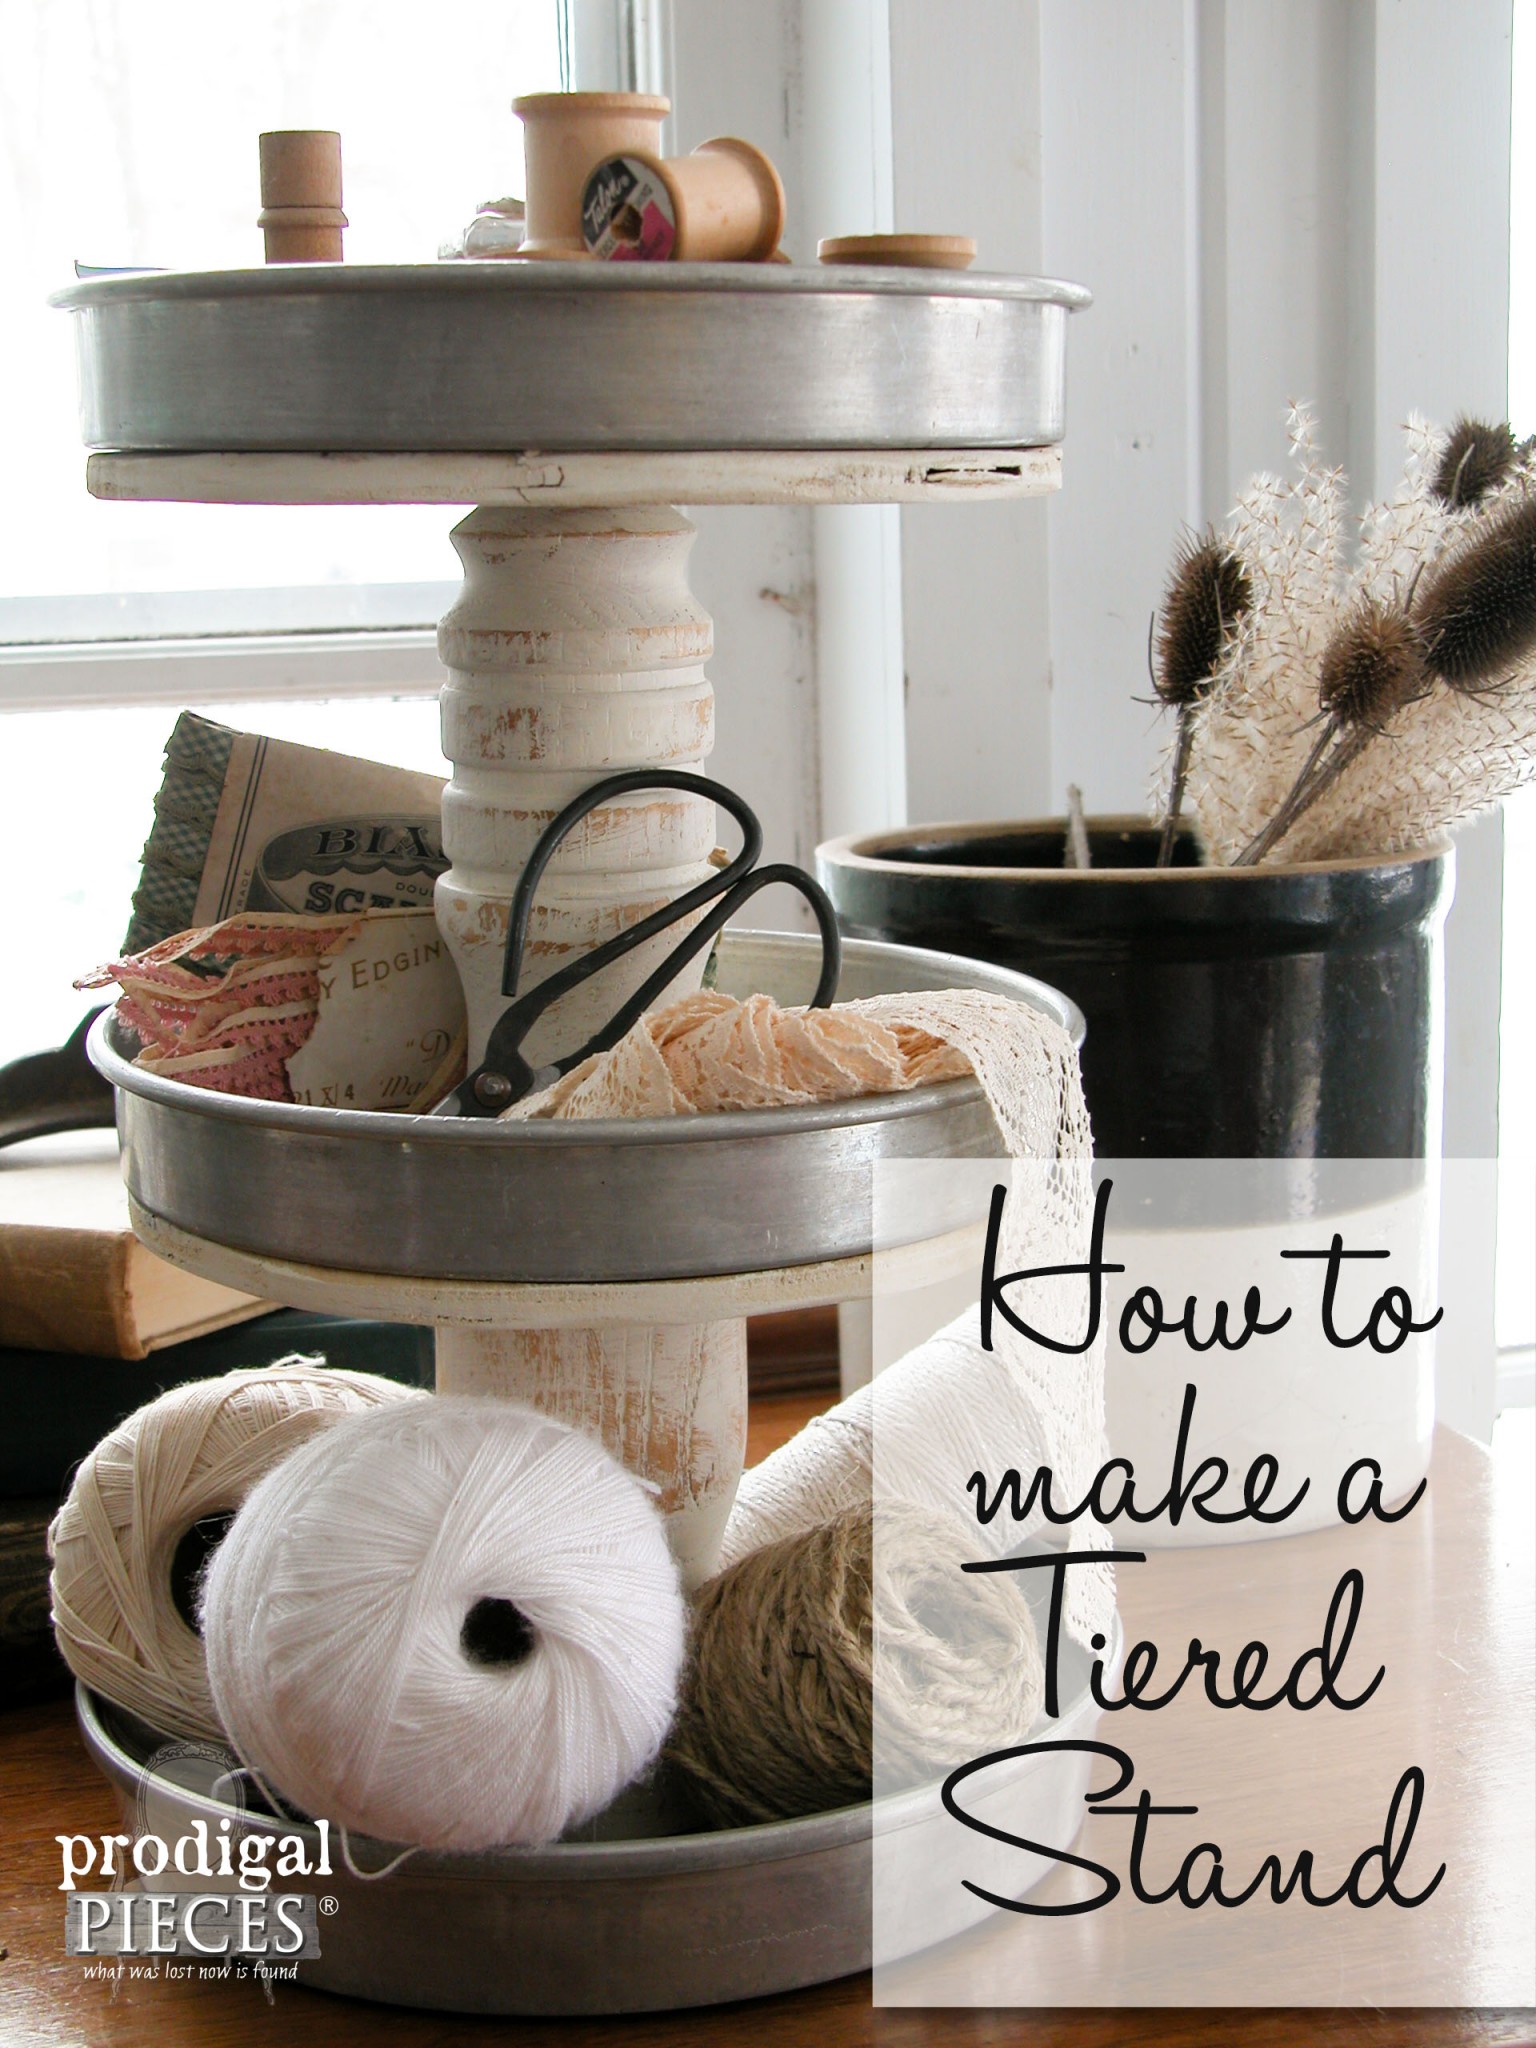 How to Make a Tiered Stand| Prodigal Pieces | www.prodigalpieces.com